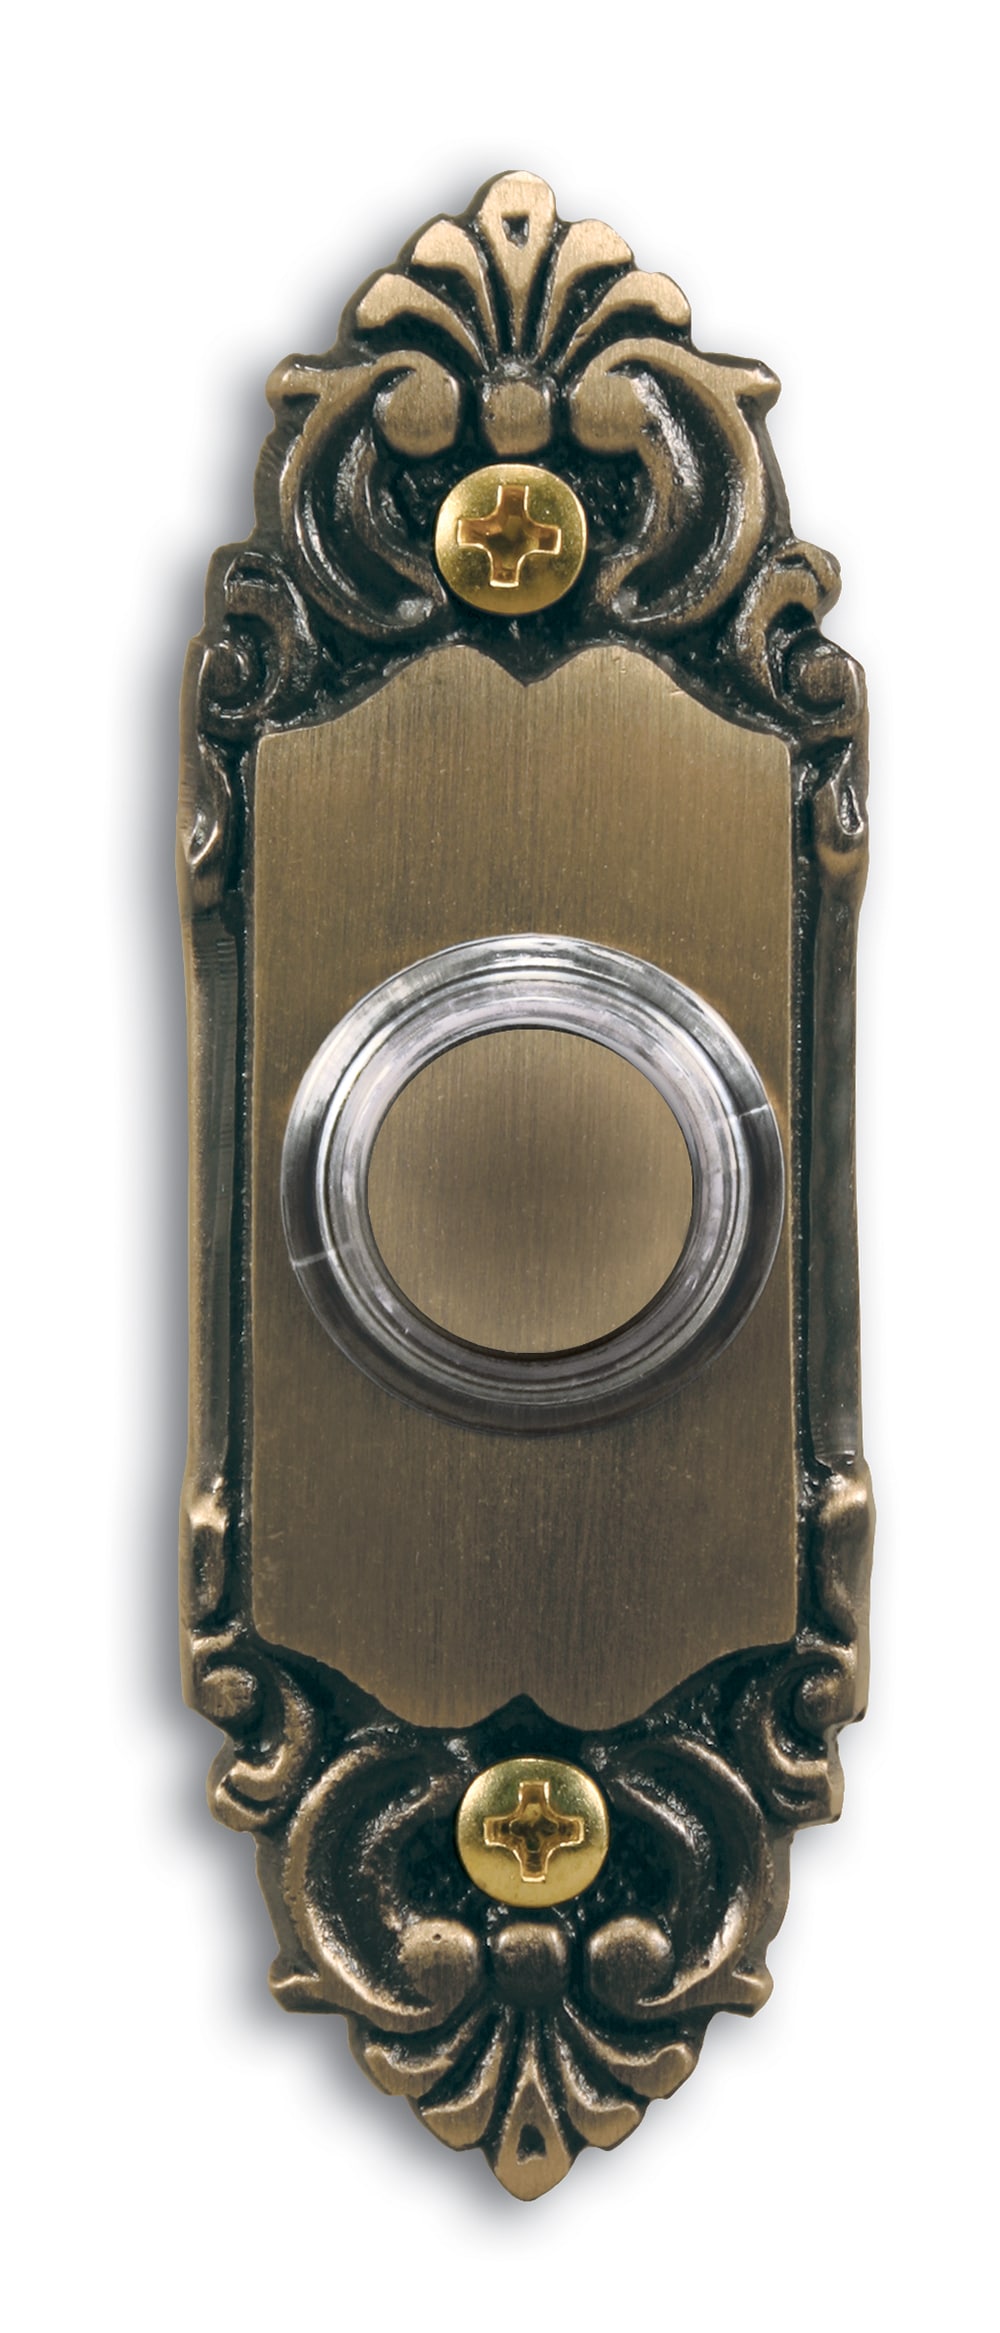 Wired Brass Doorbell Chime Push Button in Antique India | Ubuy